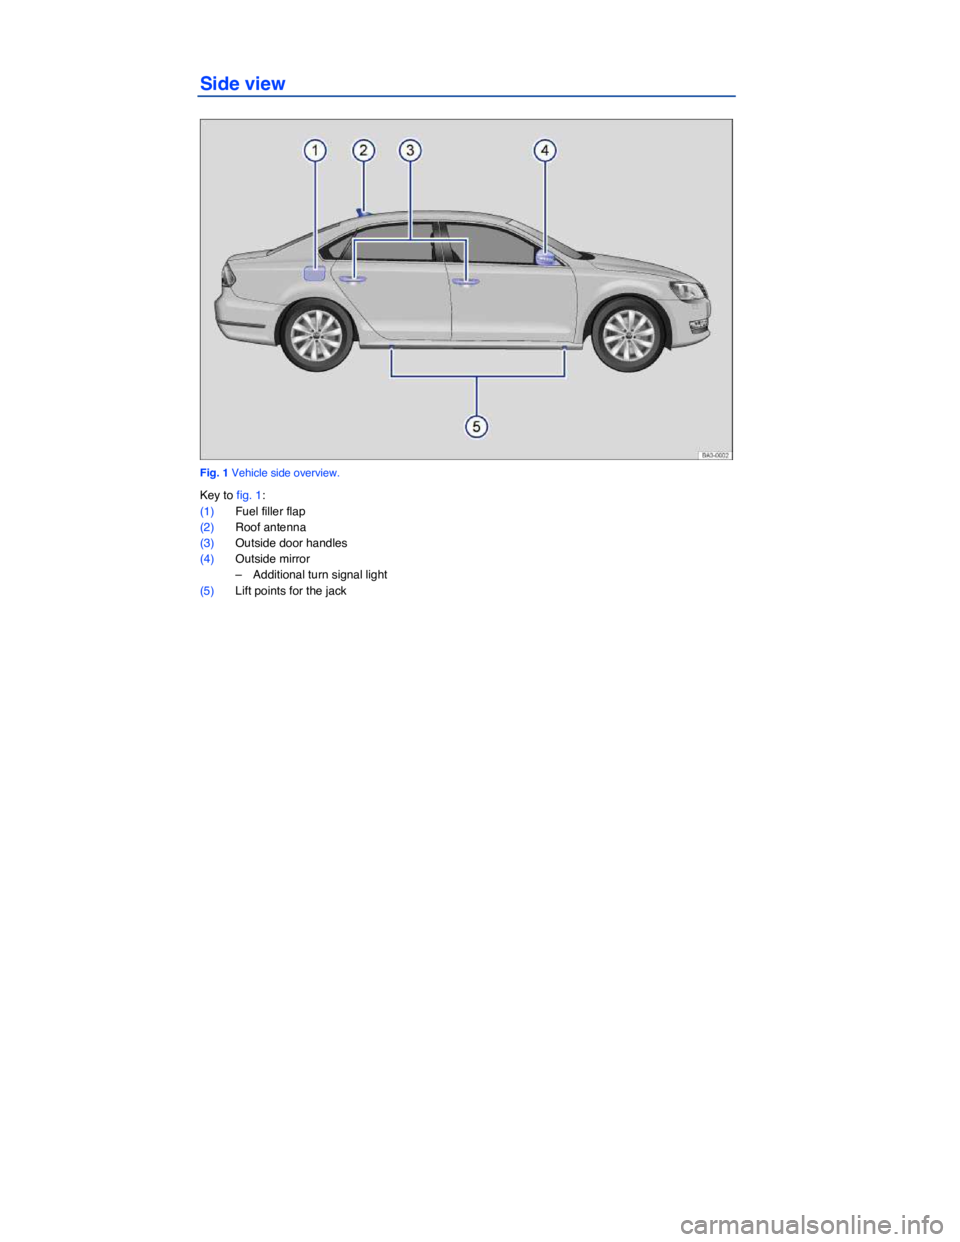 VOLKSWAGEN PASSAT SEL PREMIUM 2014  Owners Manual  
Side view 
 
Fig. 1 Vehicle side overview. 
Key to fig. 1: 
(1) Fuel filler flap  
(2) Roof antenna  
(3) Outside door handles  
(4) Outside mirror  
–  Additional turn signal light  
(5) Lift poi